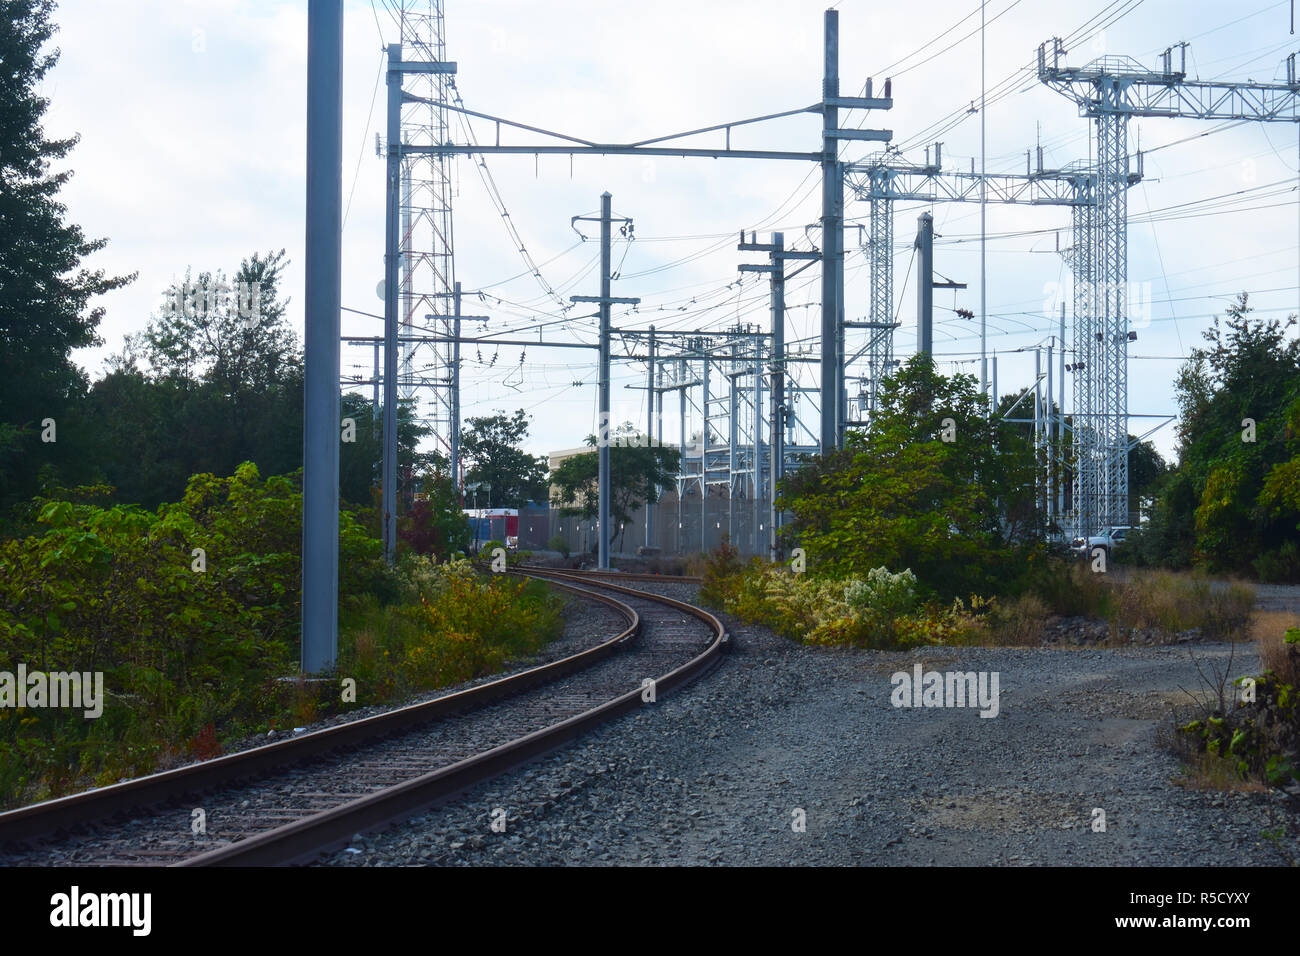 High voltage electrical power tower and cables over railroad tracks on a partly cloudy day Stock Photo